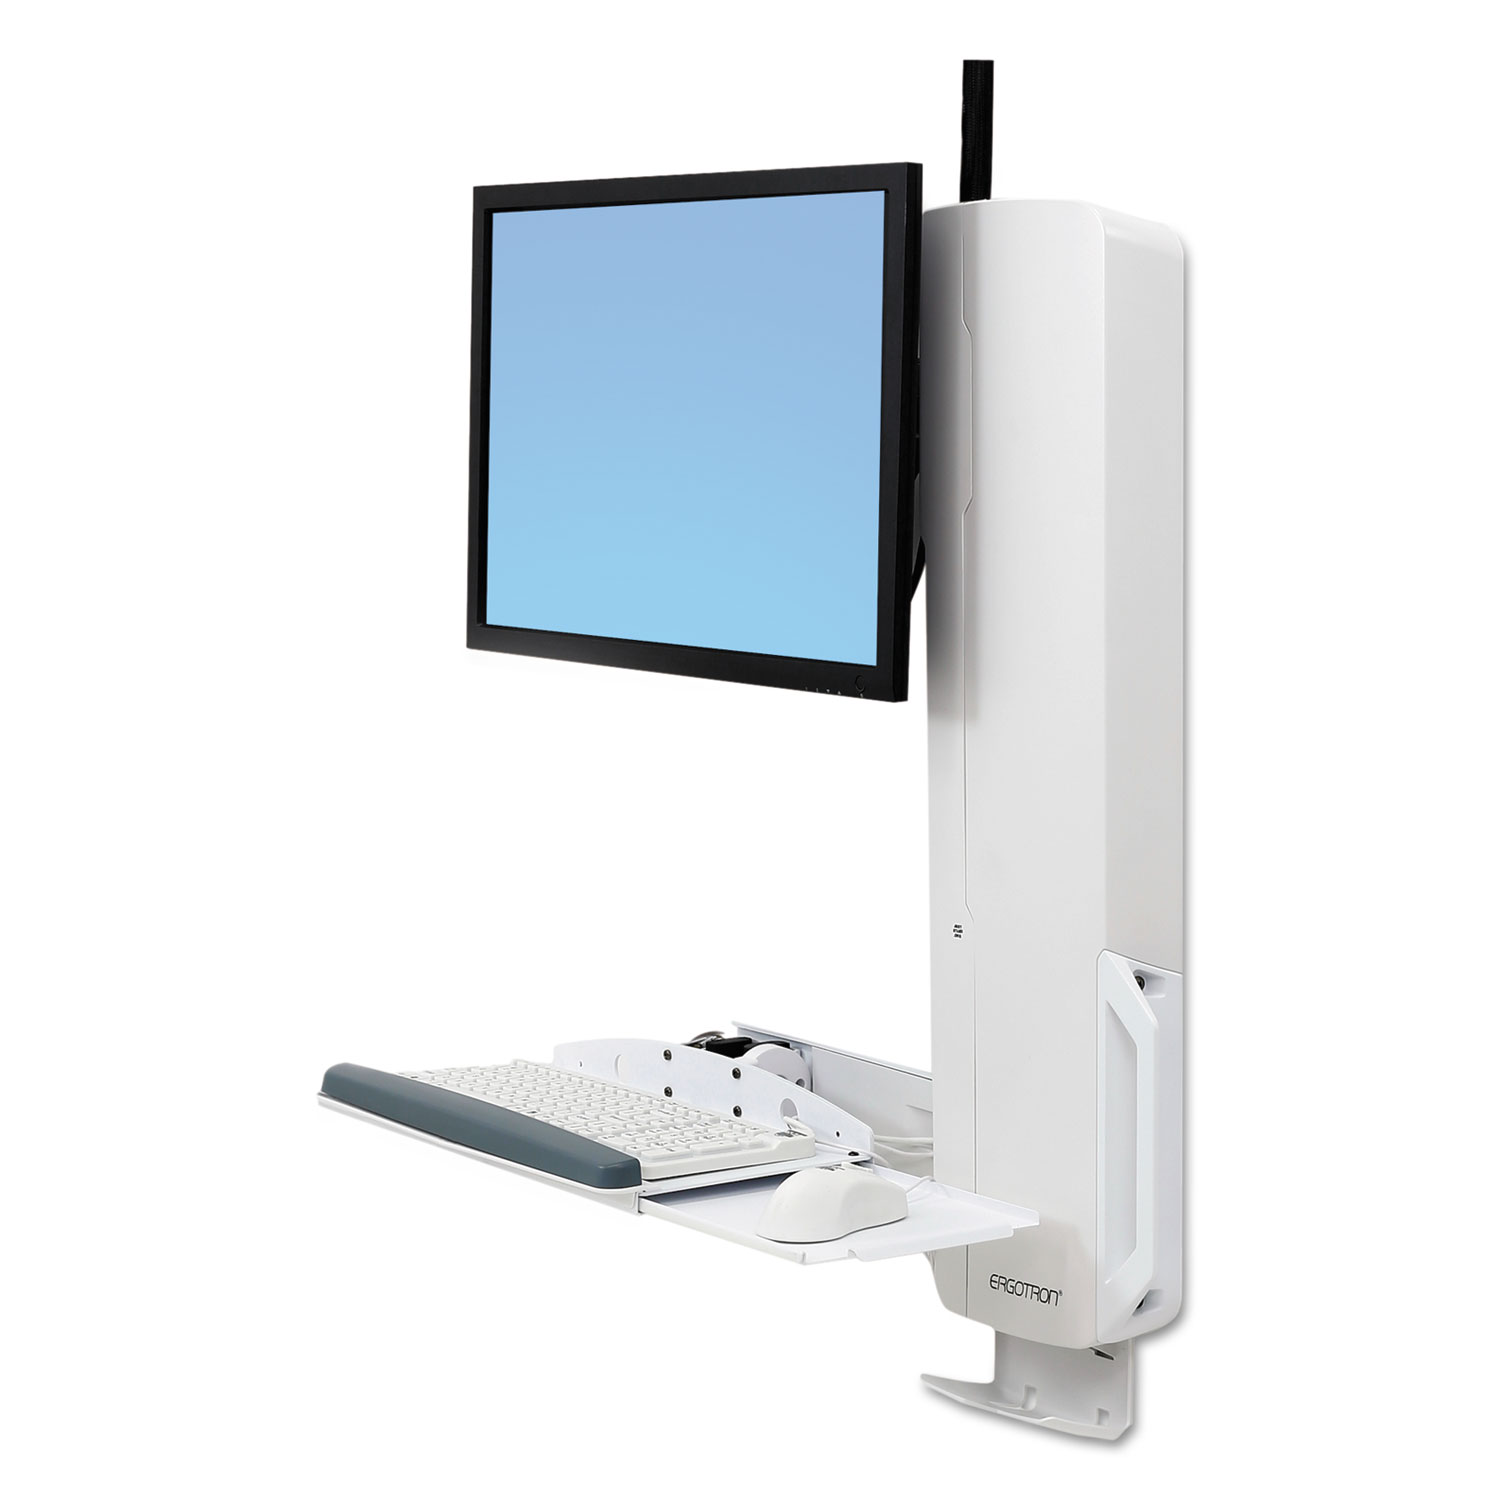  Ergotron 61-081-062 StyleView Sit-Stand Vertical Lift For High Traffic Areas, 18w x 27d x 26h, White (ERG61081062) 